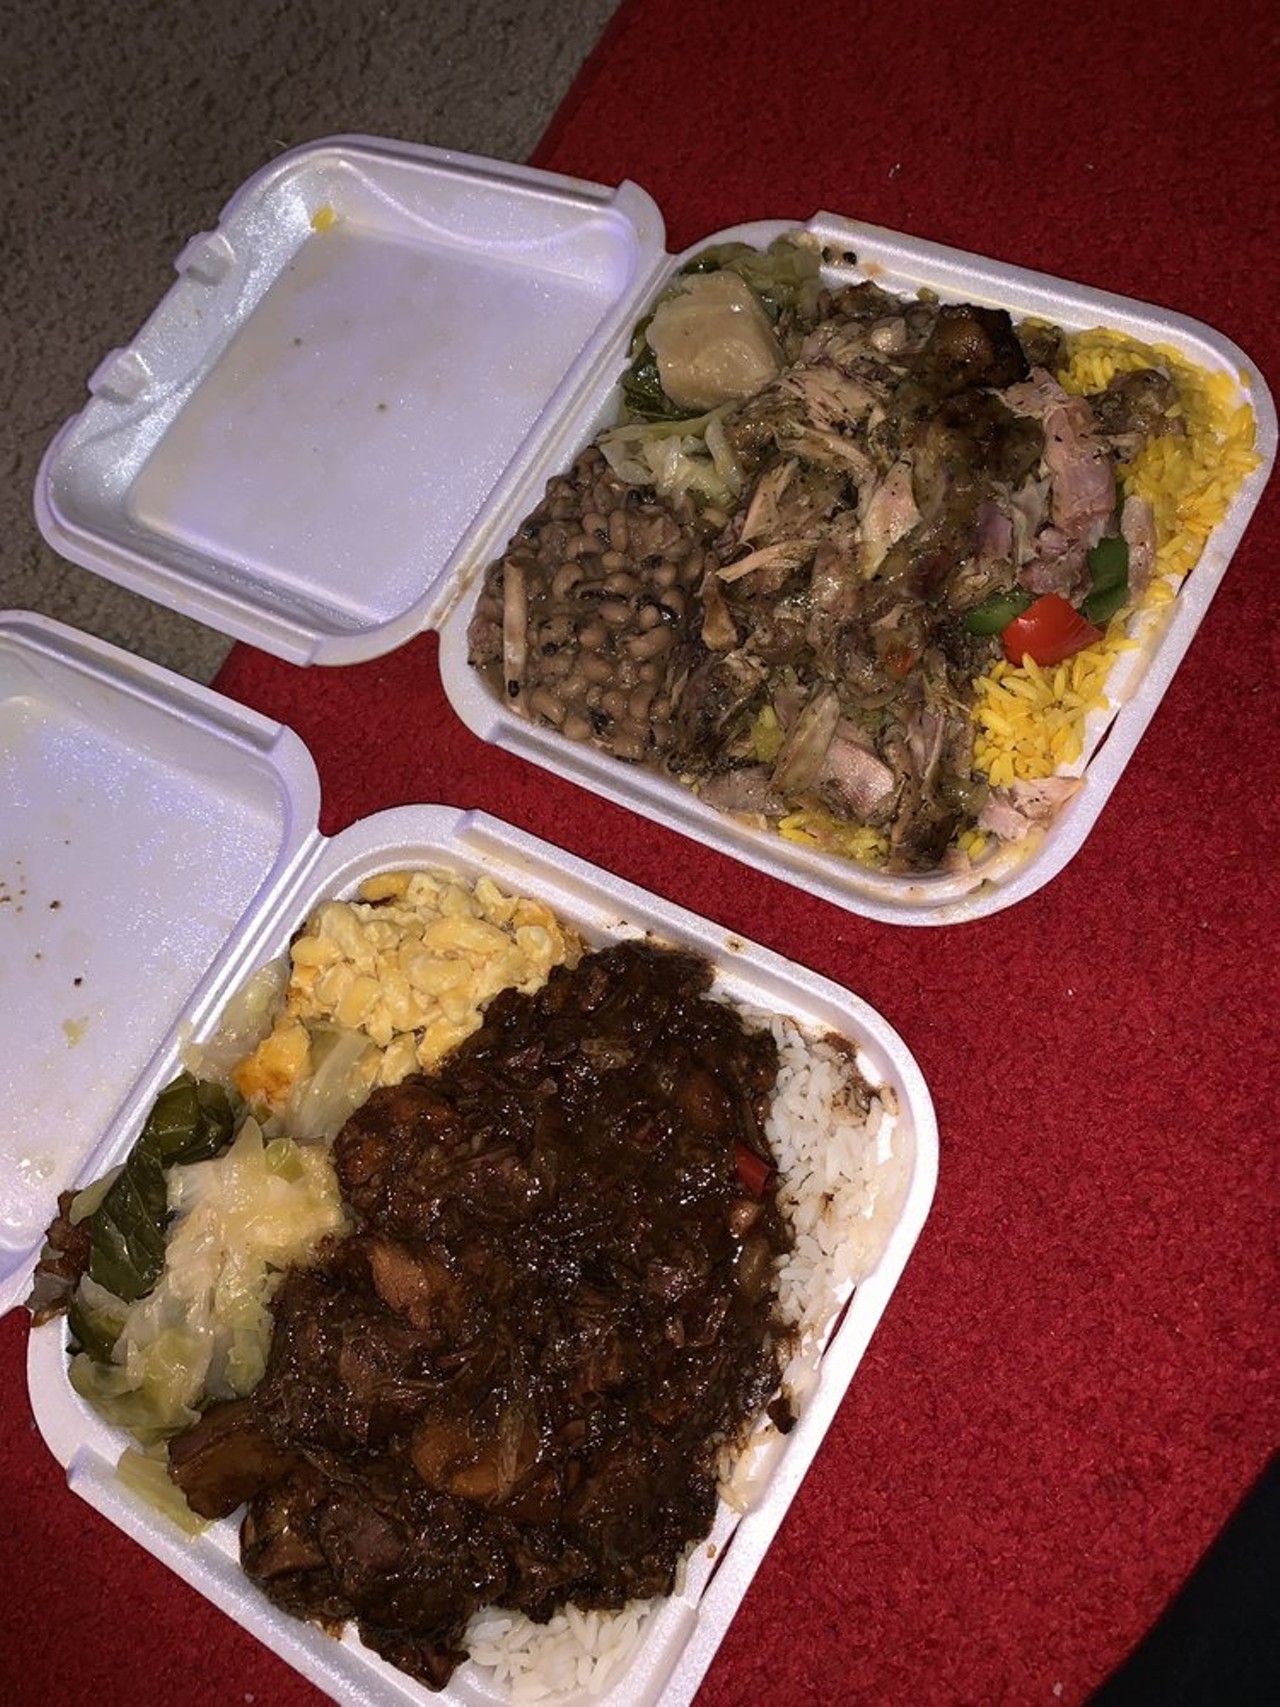 King of Soulfood 
1208 Bruton Blvd, 407-290-2182
Peach cobbler, candy yams, yellow rice and ham - just some of the items you can find at this small business inside a convenience store in West Orlando.
Photo via Terika T./Yelp